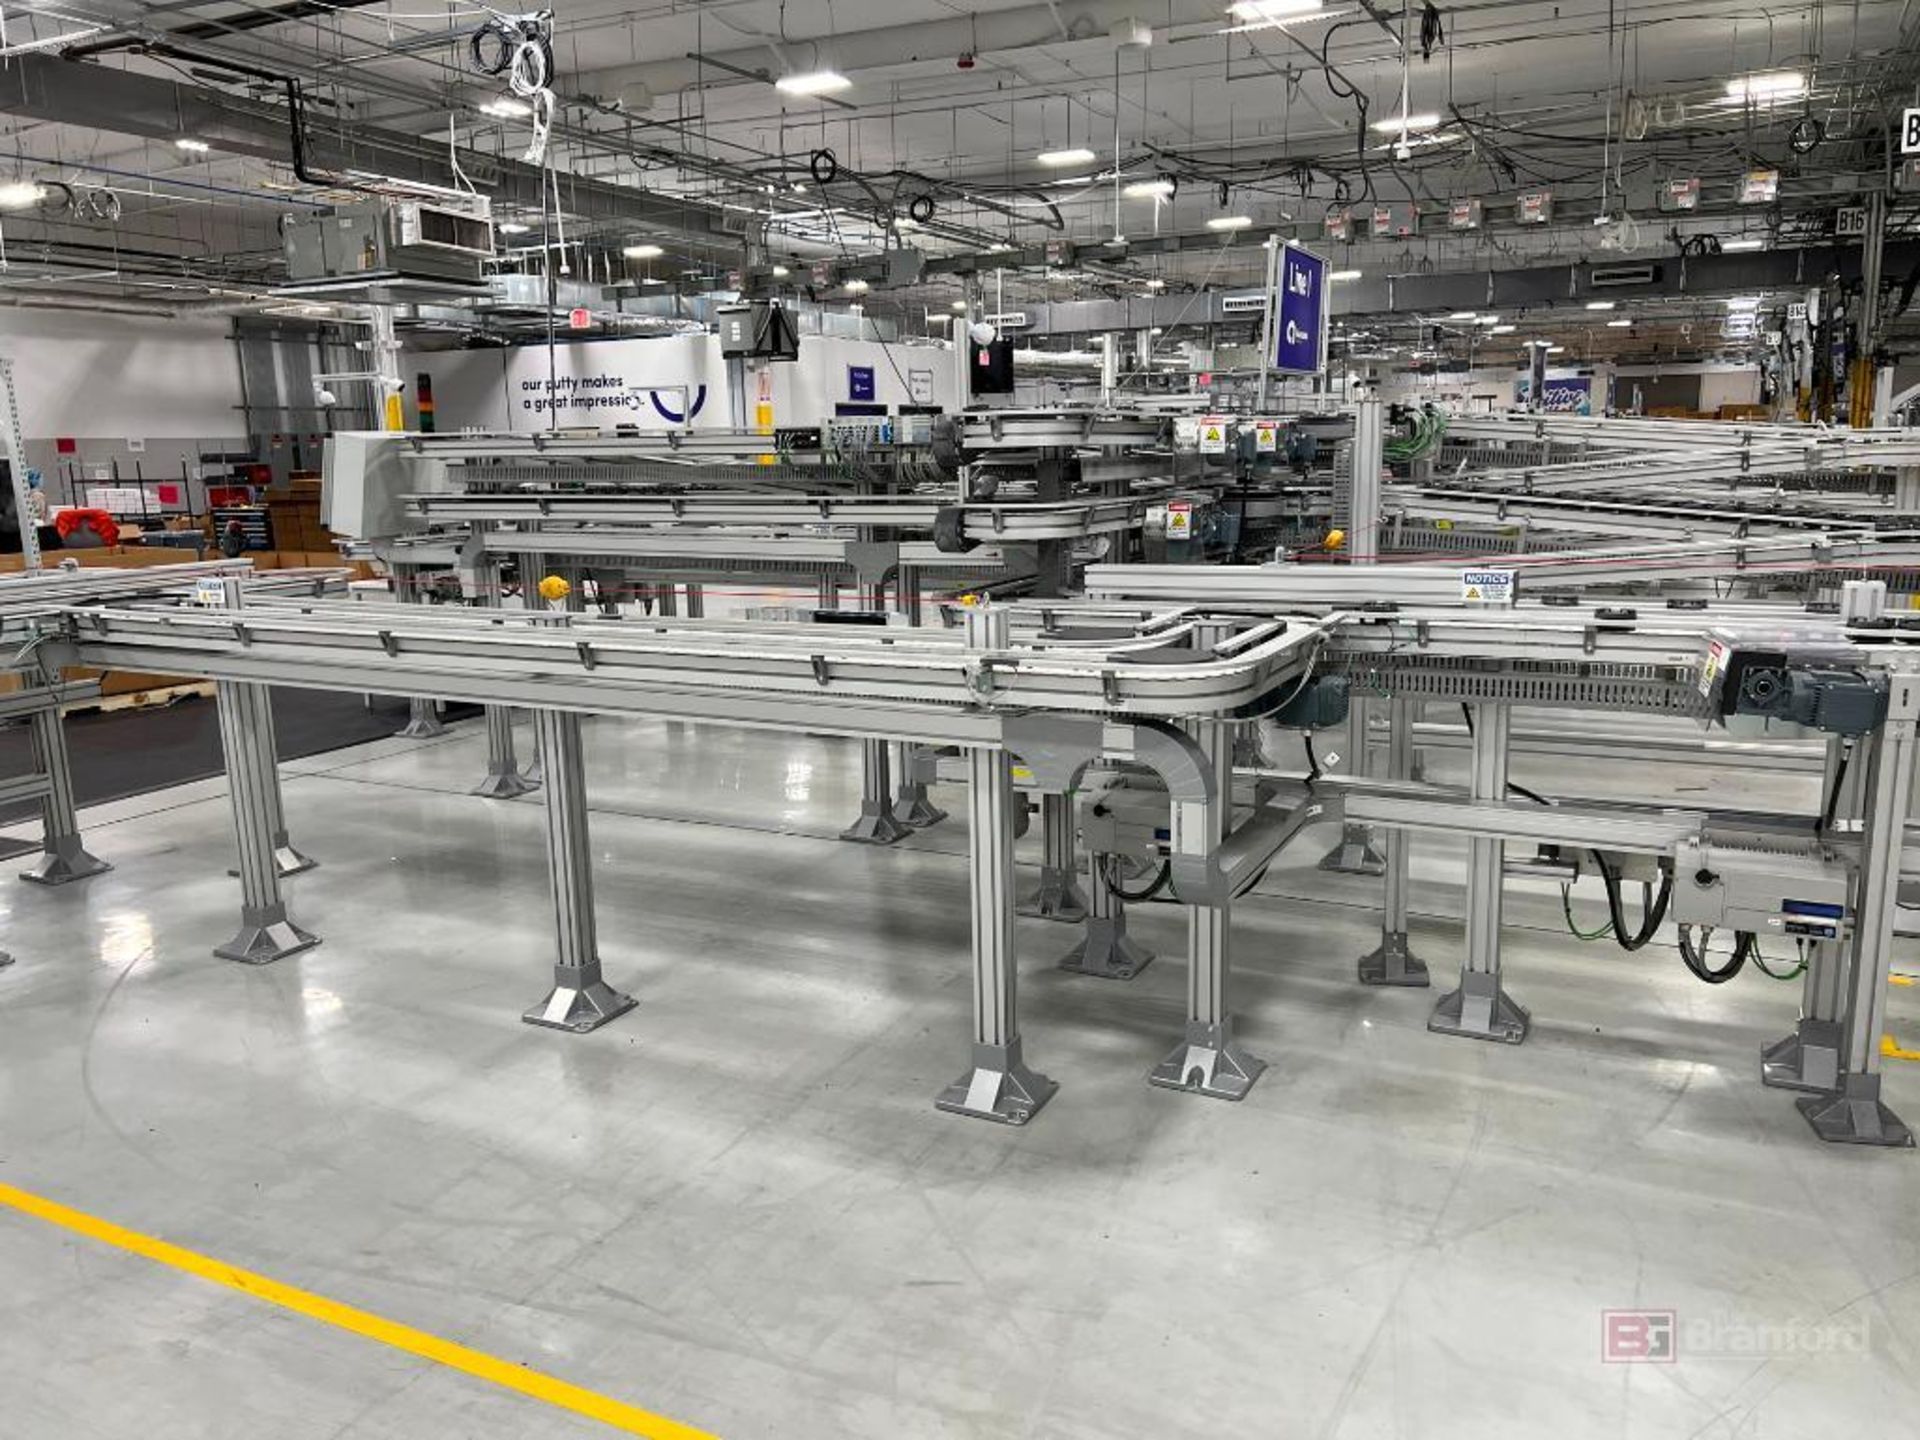 Flexlink Gen2 Multi-Layer Belt Conveyor System with DRO main control - Image 16 of 18